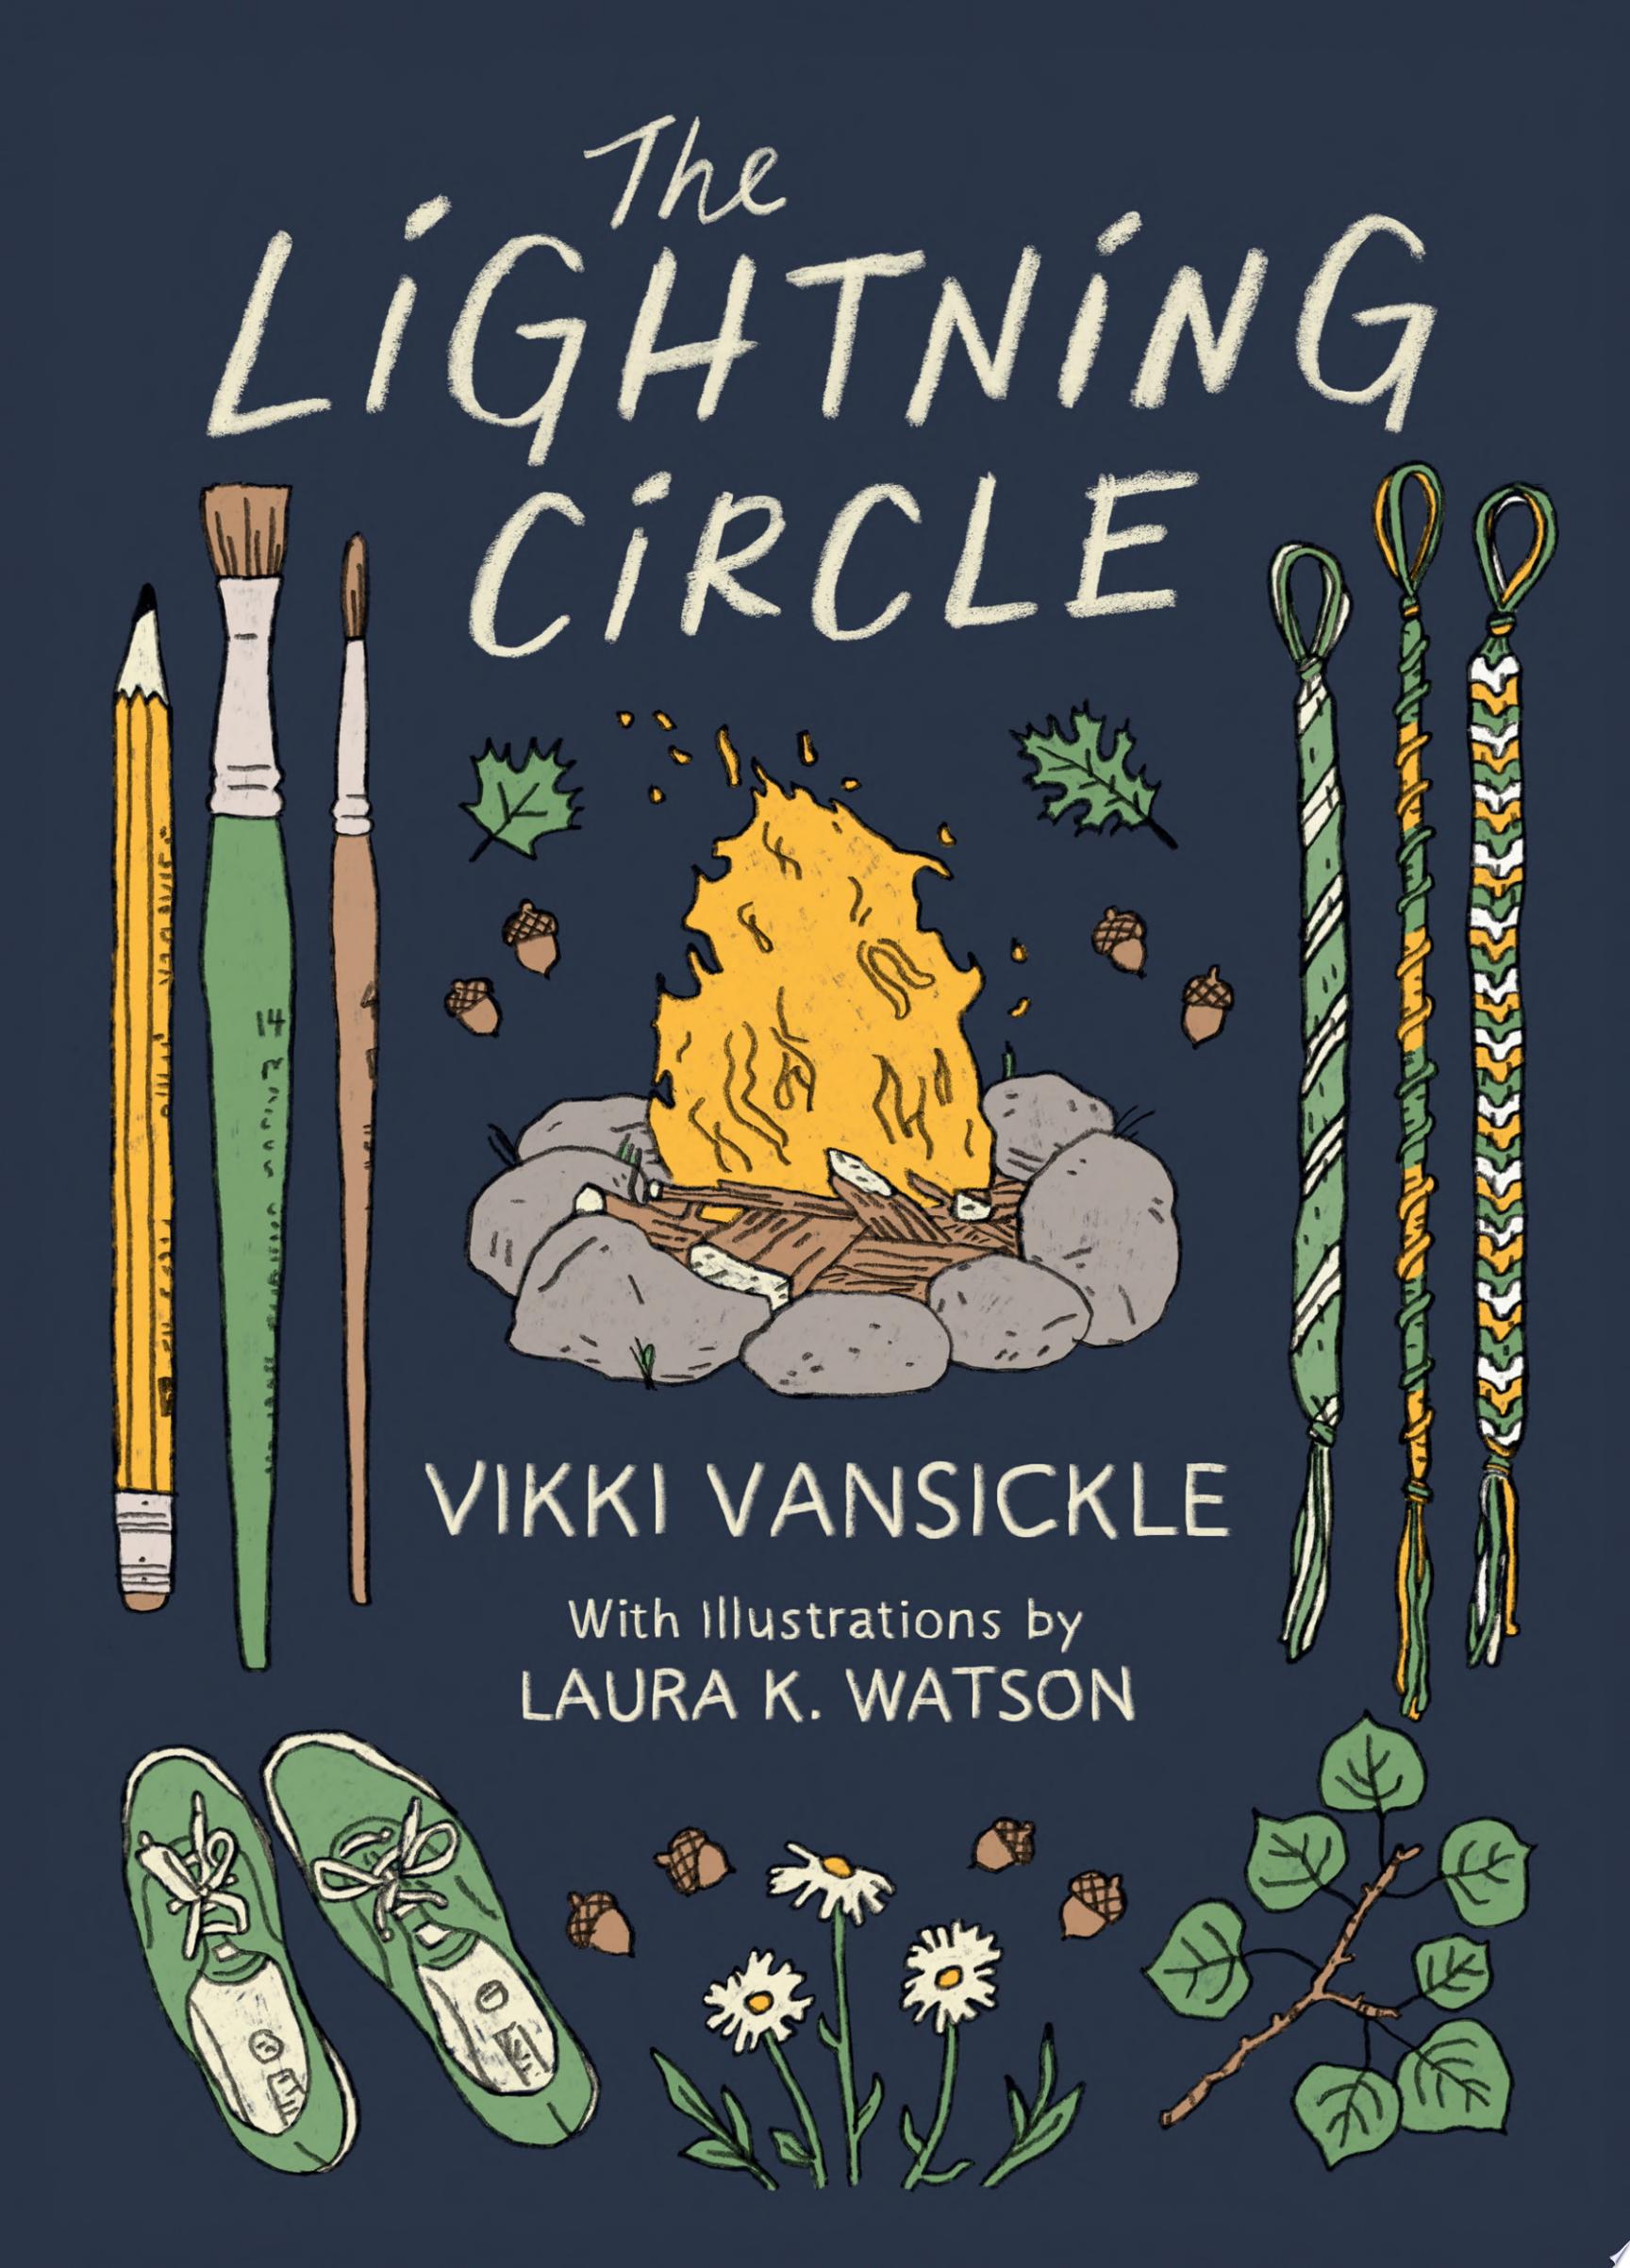 Image for "The Lightning Circle"